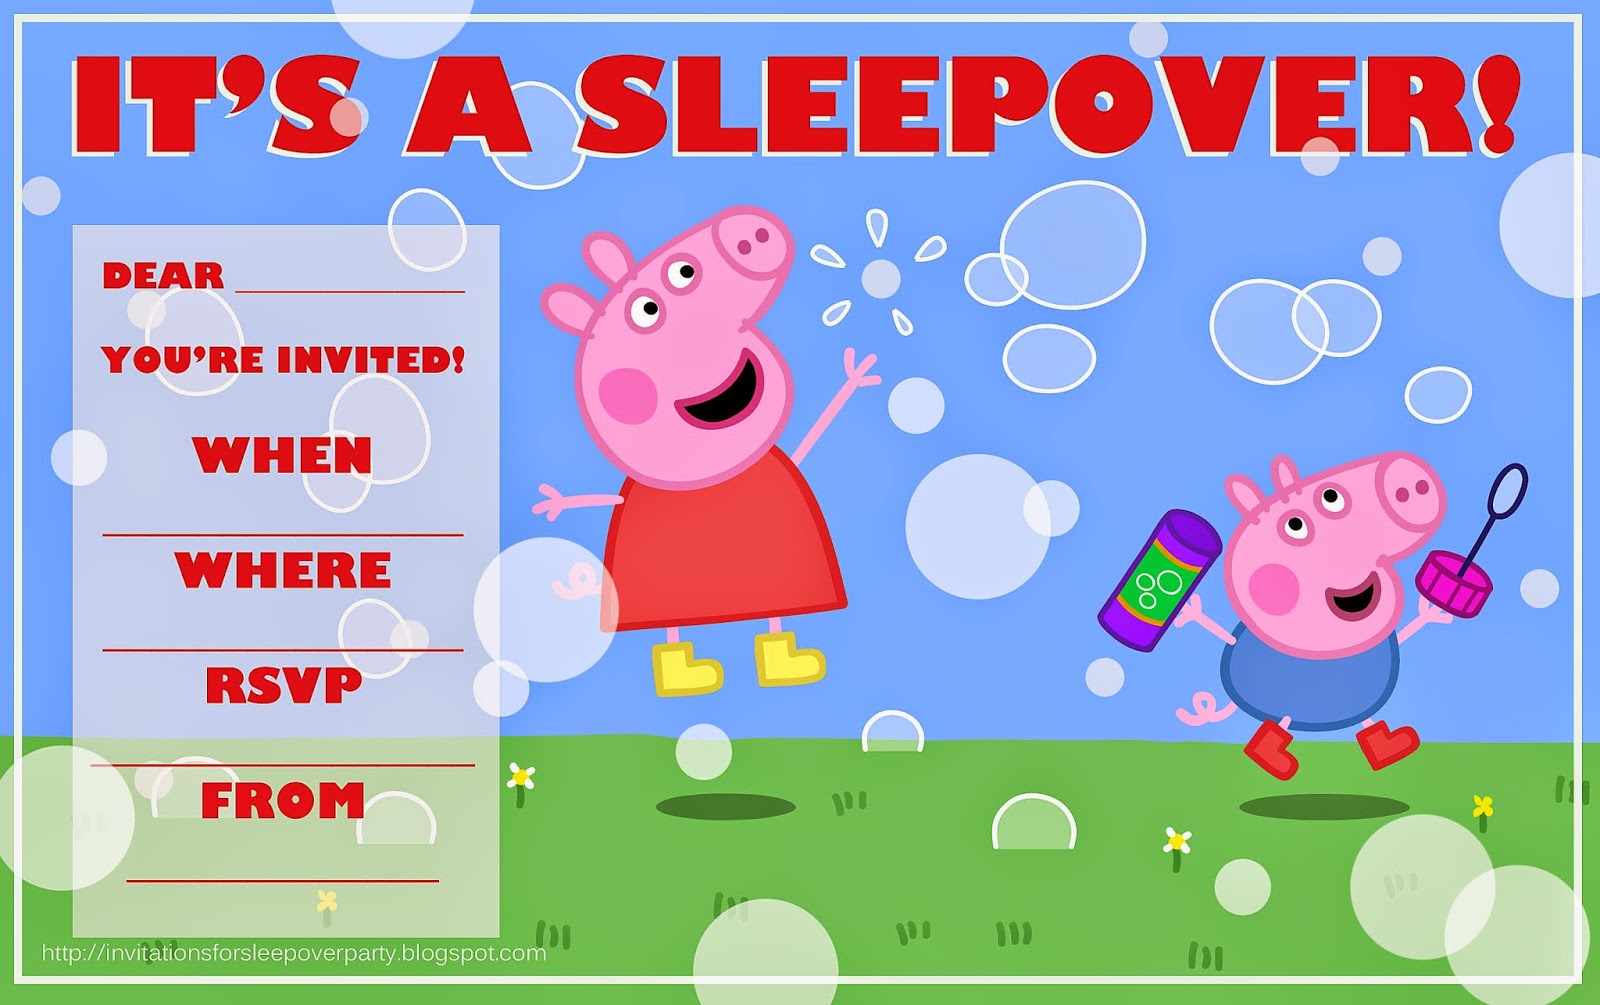 invitations-for-sleepover-party-peppa-pig-party-invitation-and-peppa